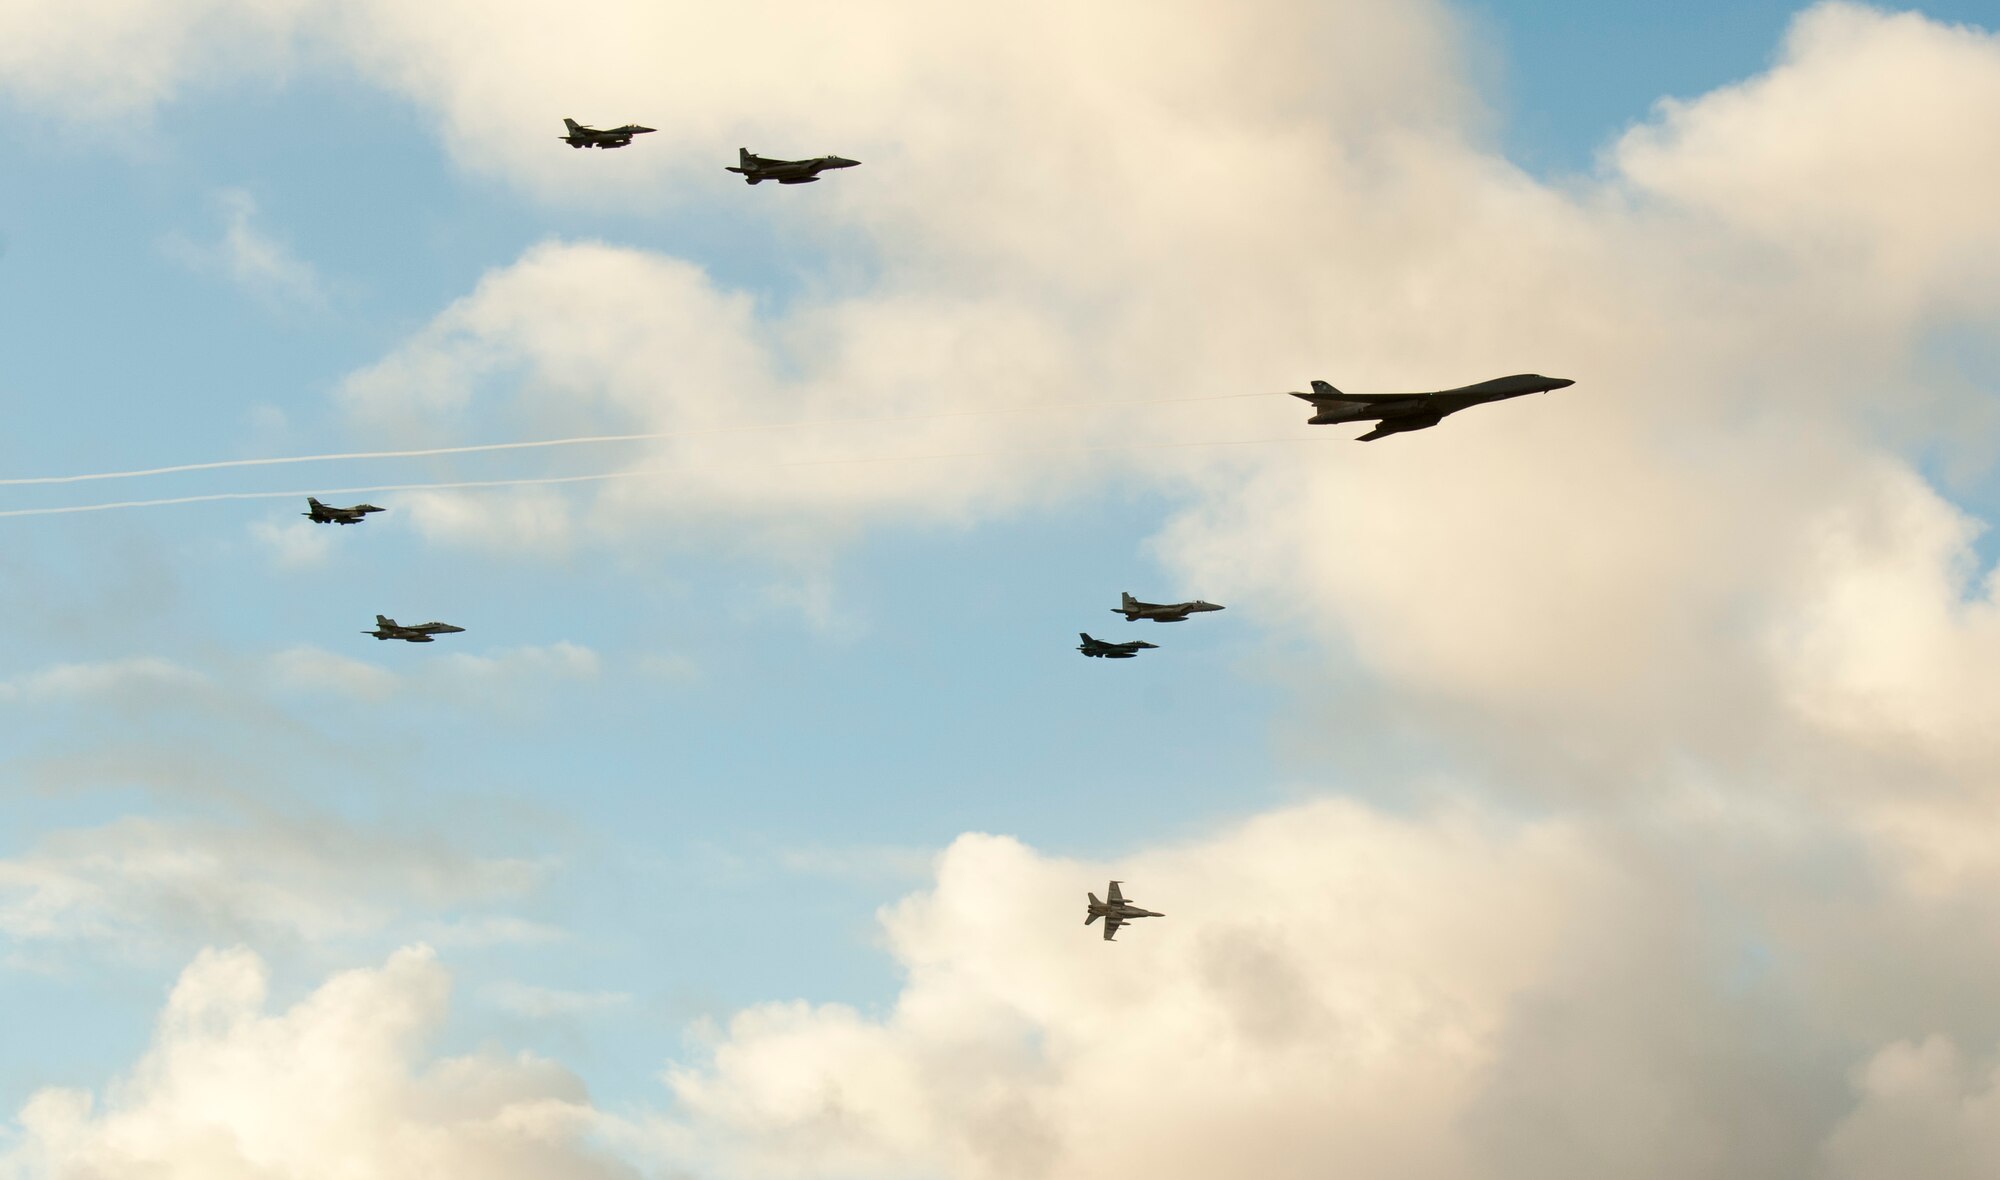 Aircraft from the United States, Japanese and Australian air forces fly in formation during exercise Cope North 2017 off the coast of Guam, Feb. 21, 2017. The exercise includes 22 total flying units and more than 2,700 personnel from three countries and continues the growth of strong, interoperable relationships within the Indo-Asia Pacific Region through integration of airborne and land-based command and control assets. (U.S. Air Force Photo by Senior Airman Keith James)